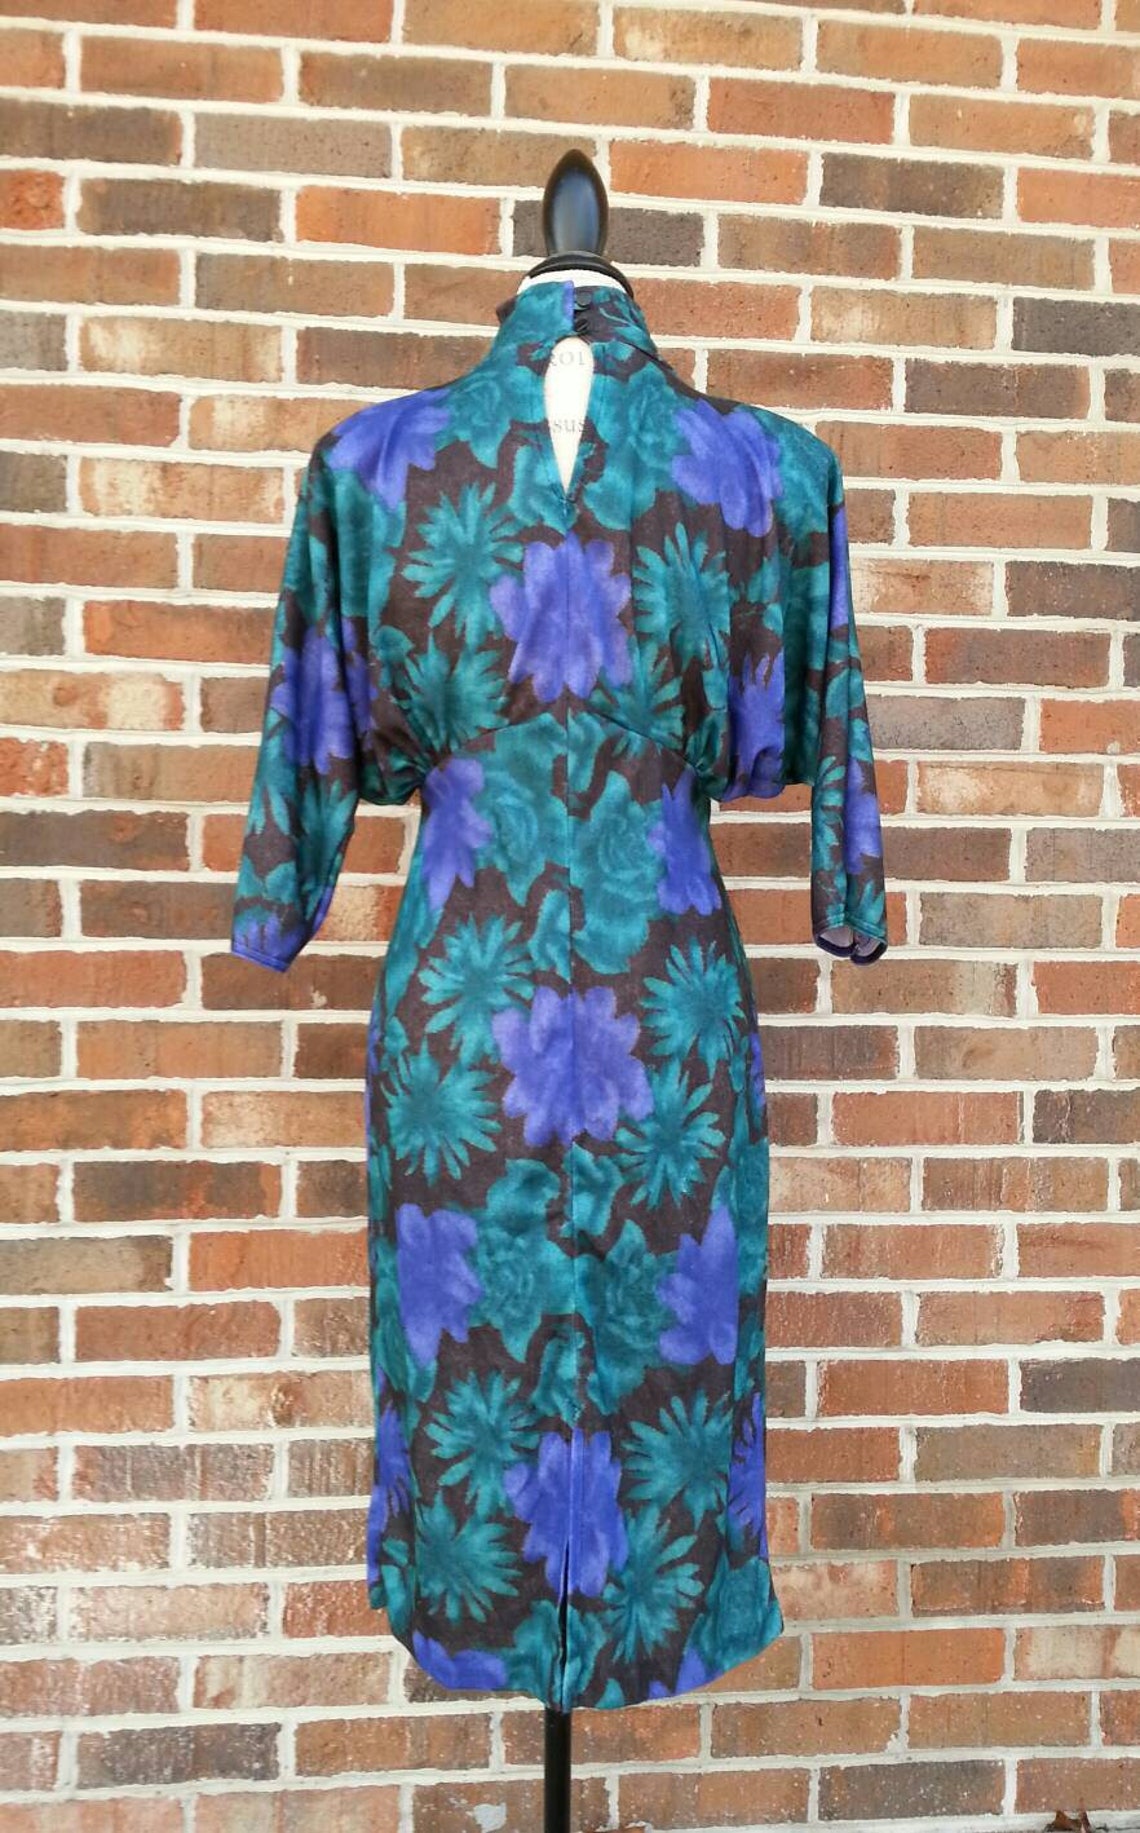 Vintage 1980s Avon Fashions Dress In Green Black And Blue | Etsy